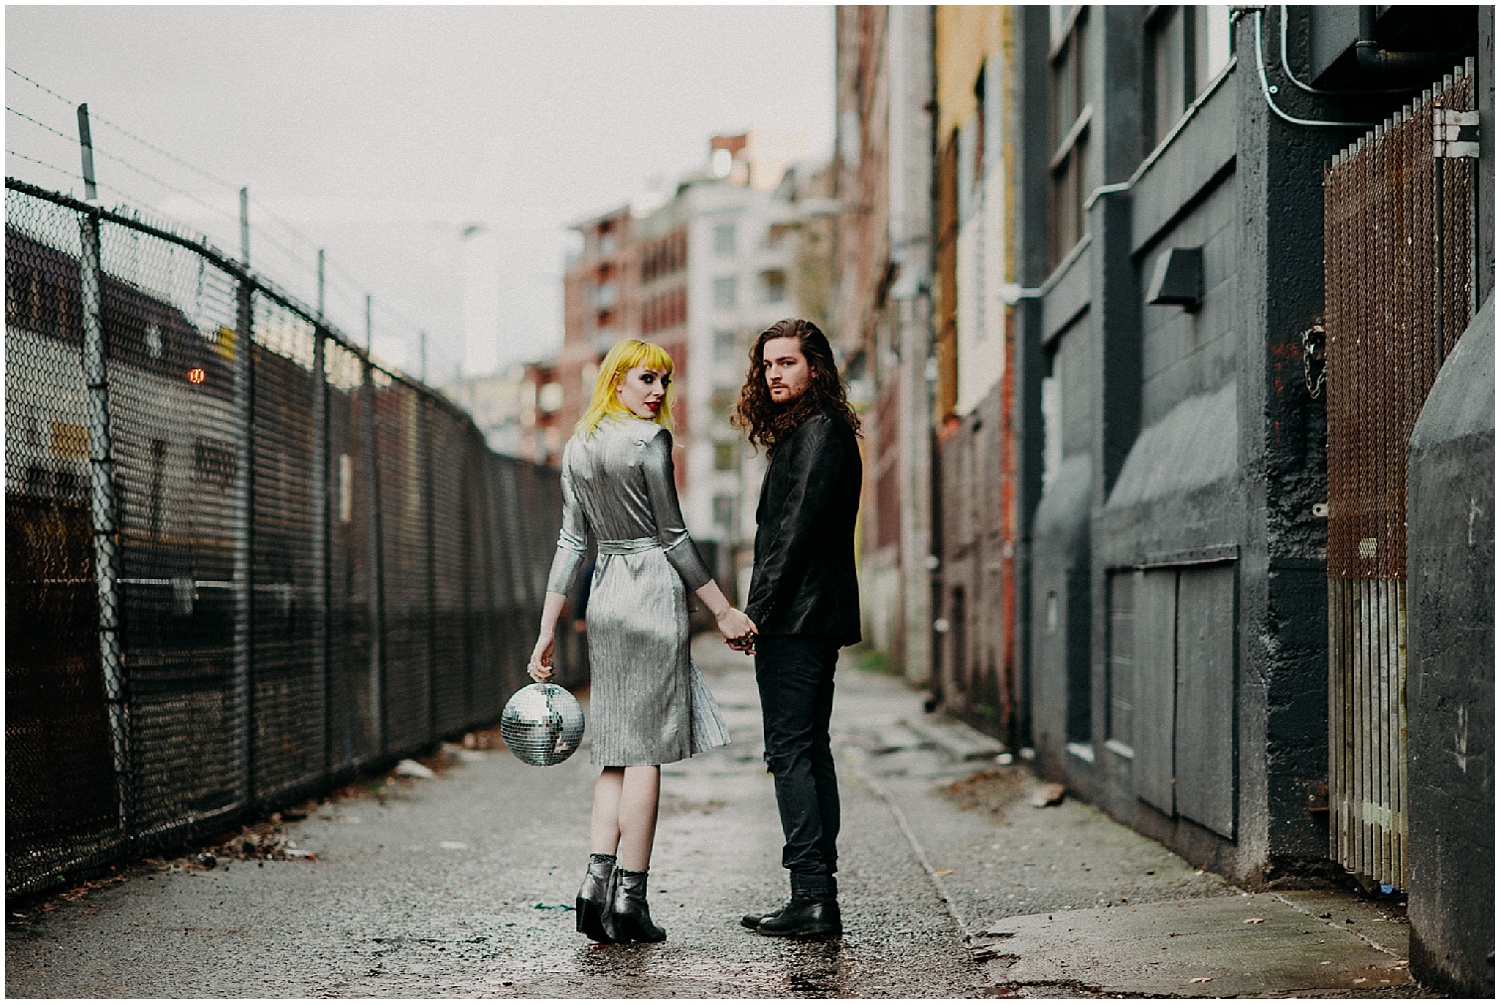  Vancouver back alley glamour grunge modern disco ball metallic dress shoes black suit curly long hair man engagement couples session concrete train chain link fence buildings 